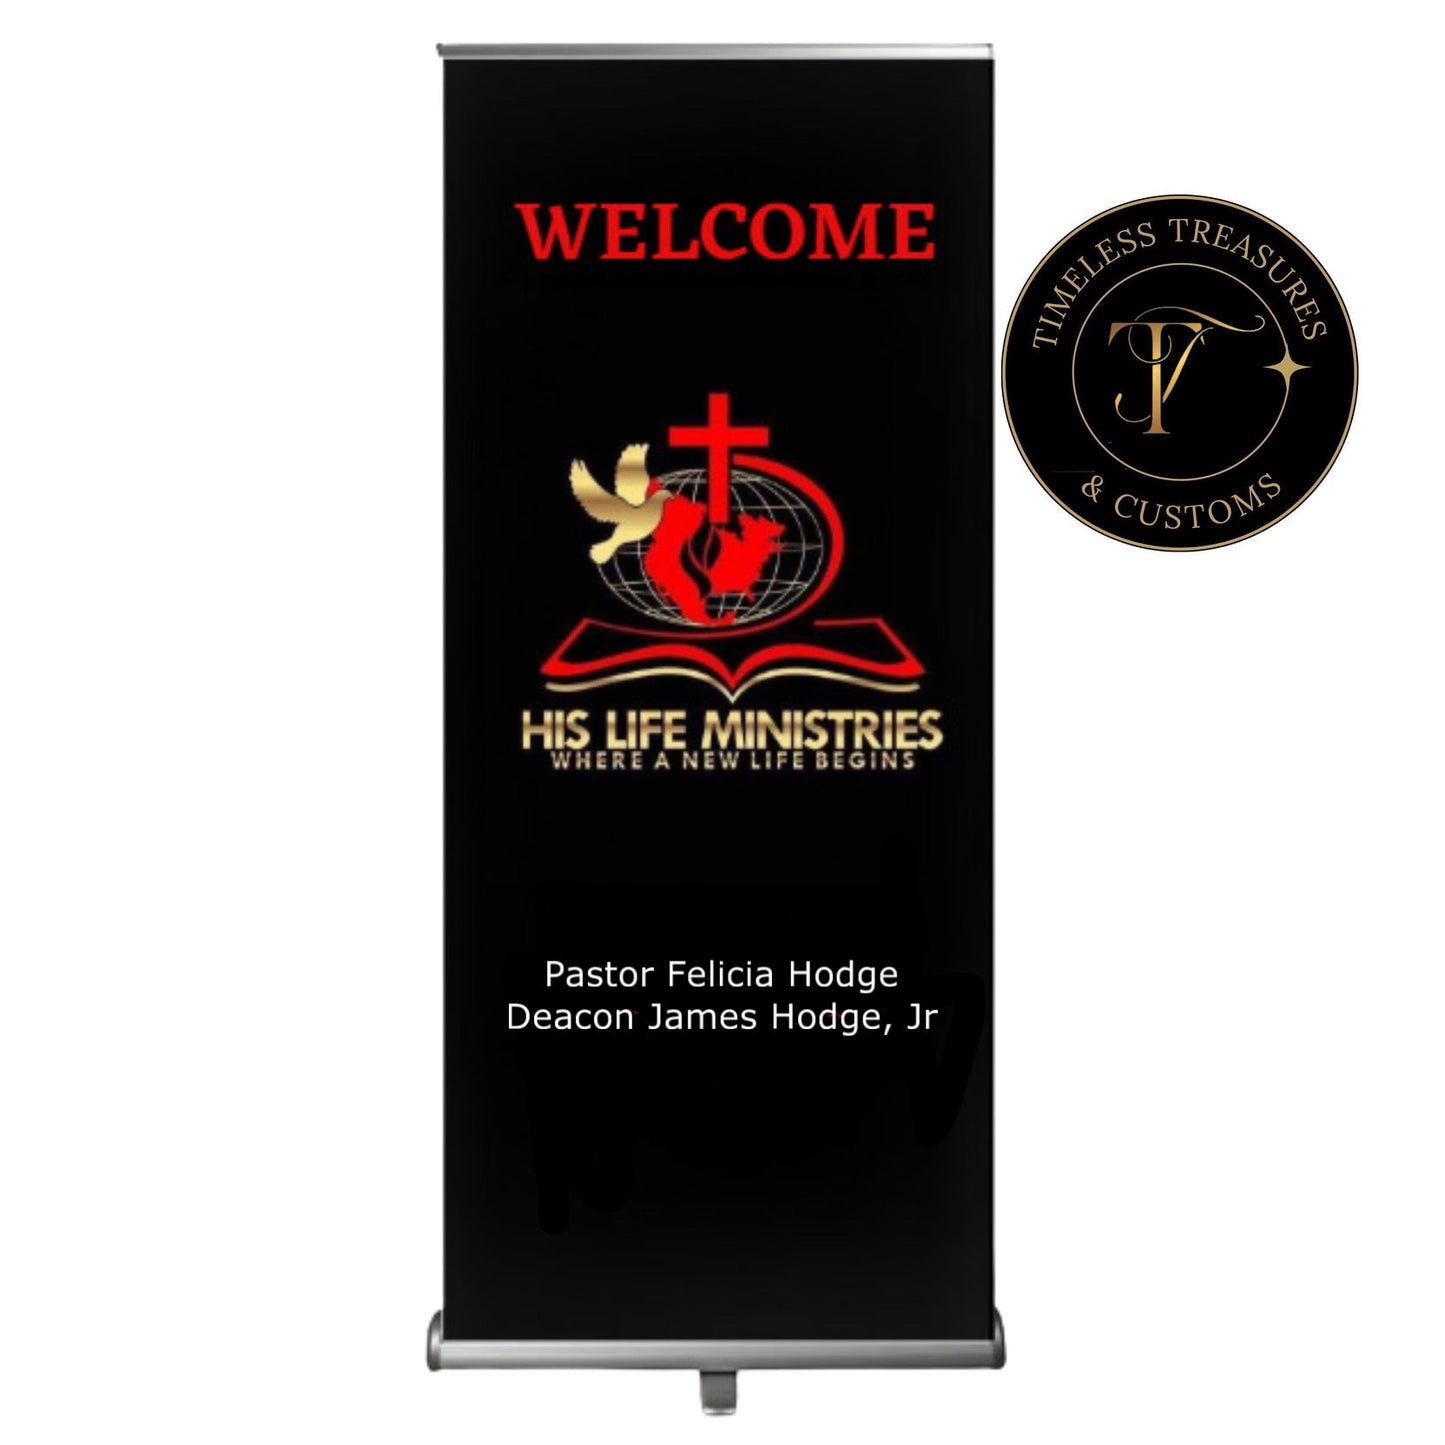 "Dynamic Impressions: Custom Retractable Banners for Every Occasion"